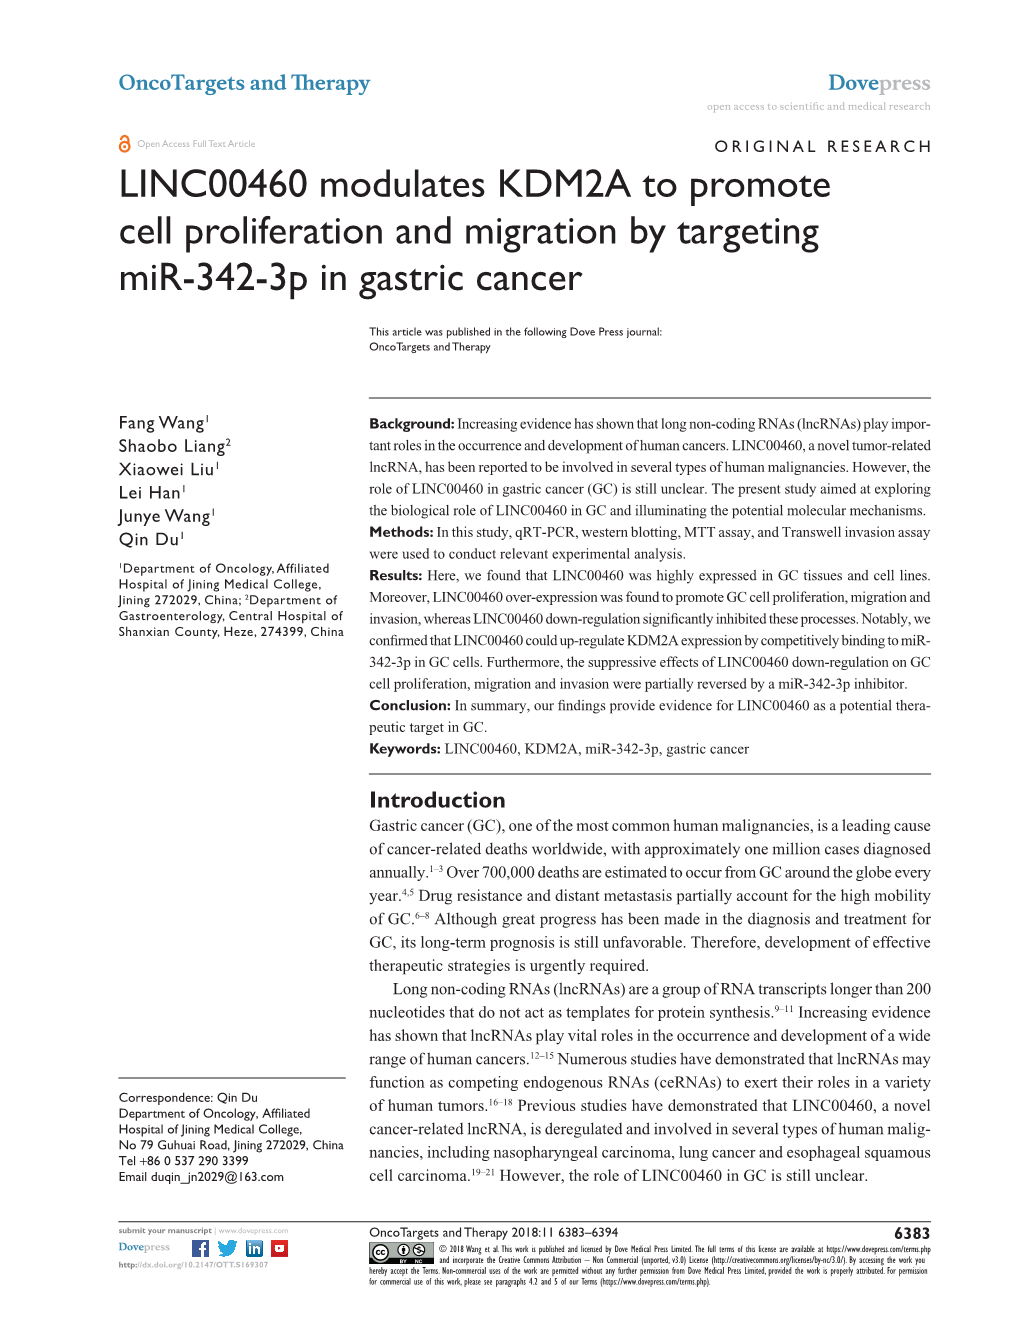 LINC00460 Modulates KDM2A to Promote Cell Proliferation and Migration by Targeting Mir-342-3P in Gastric Cancer